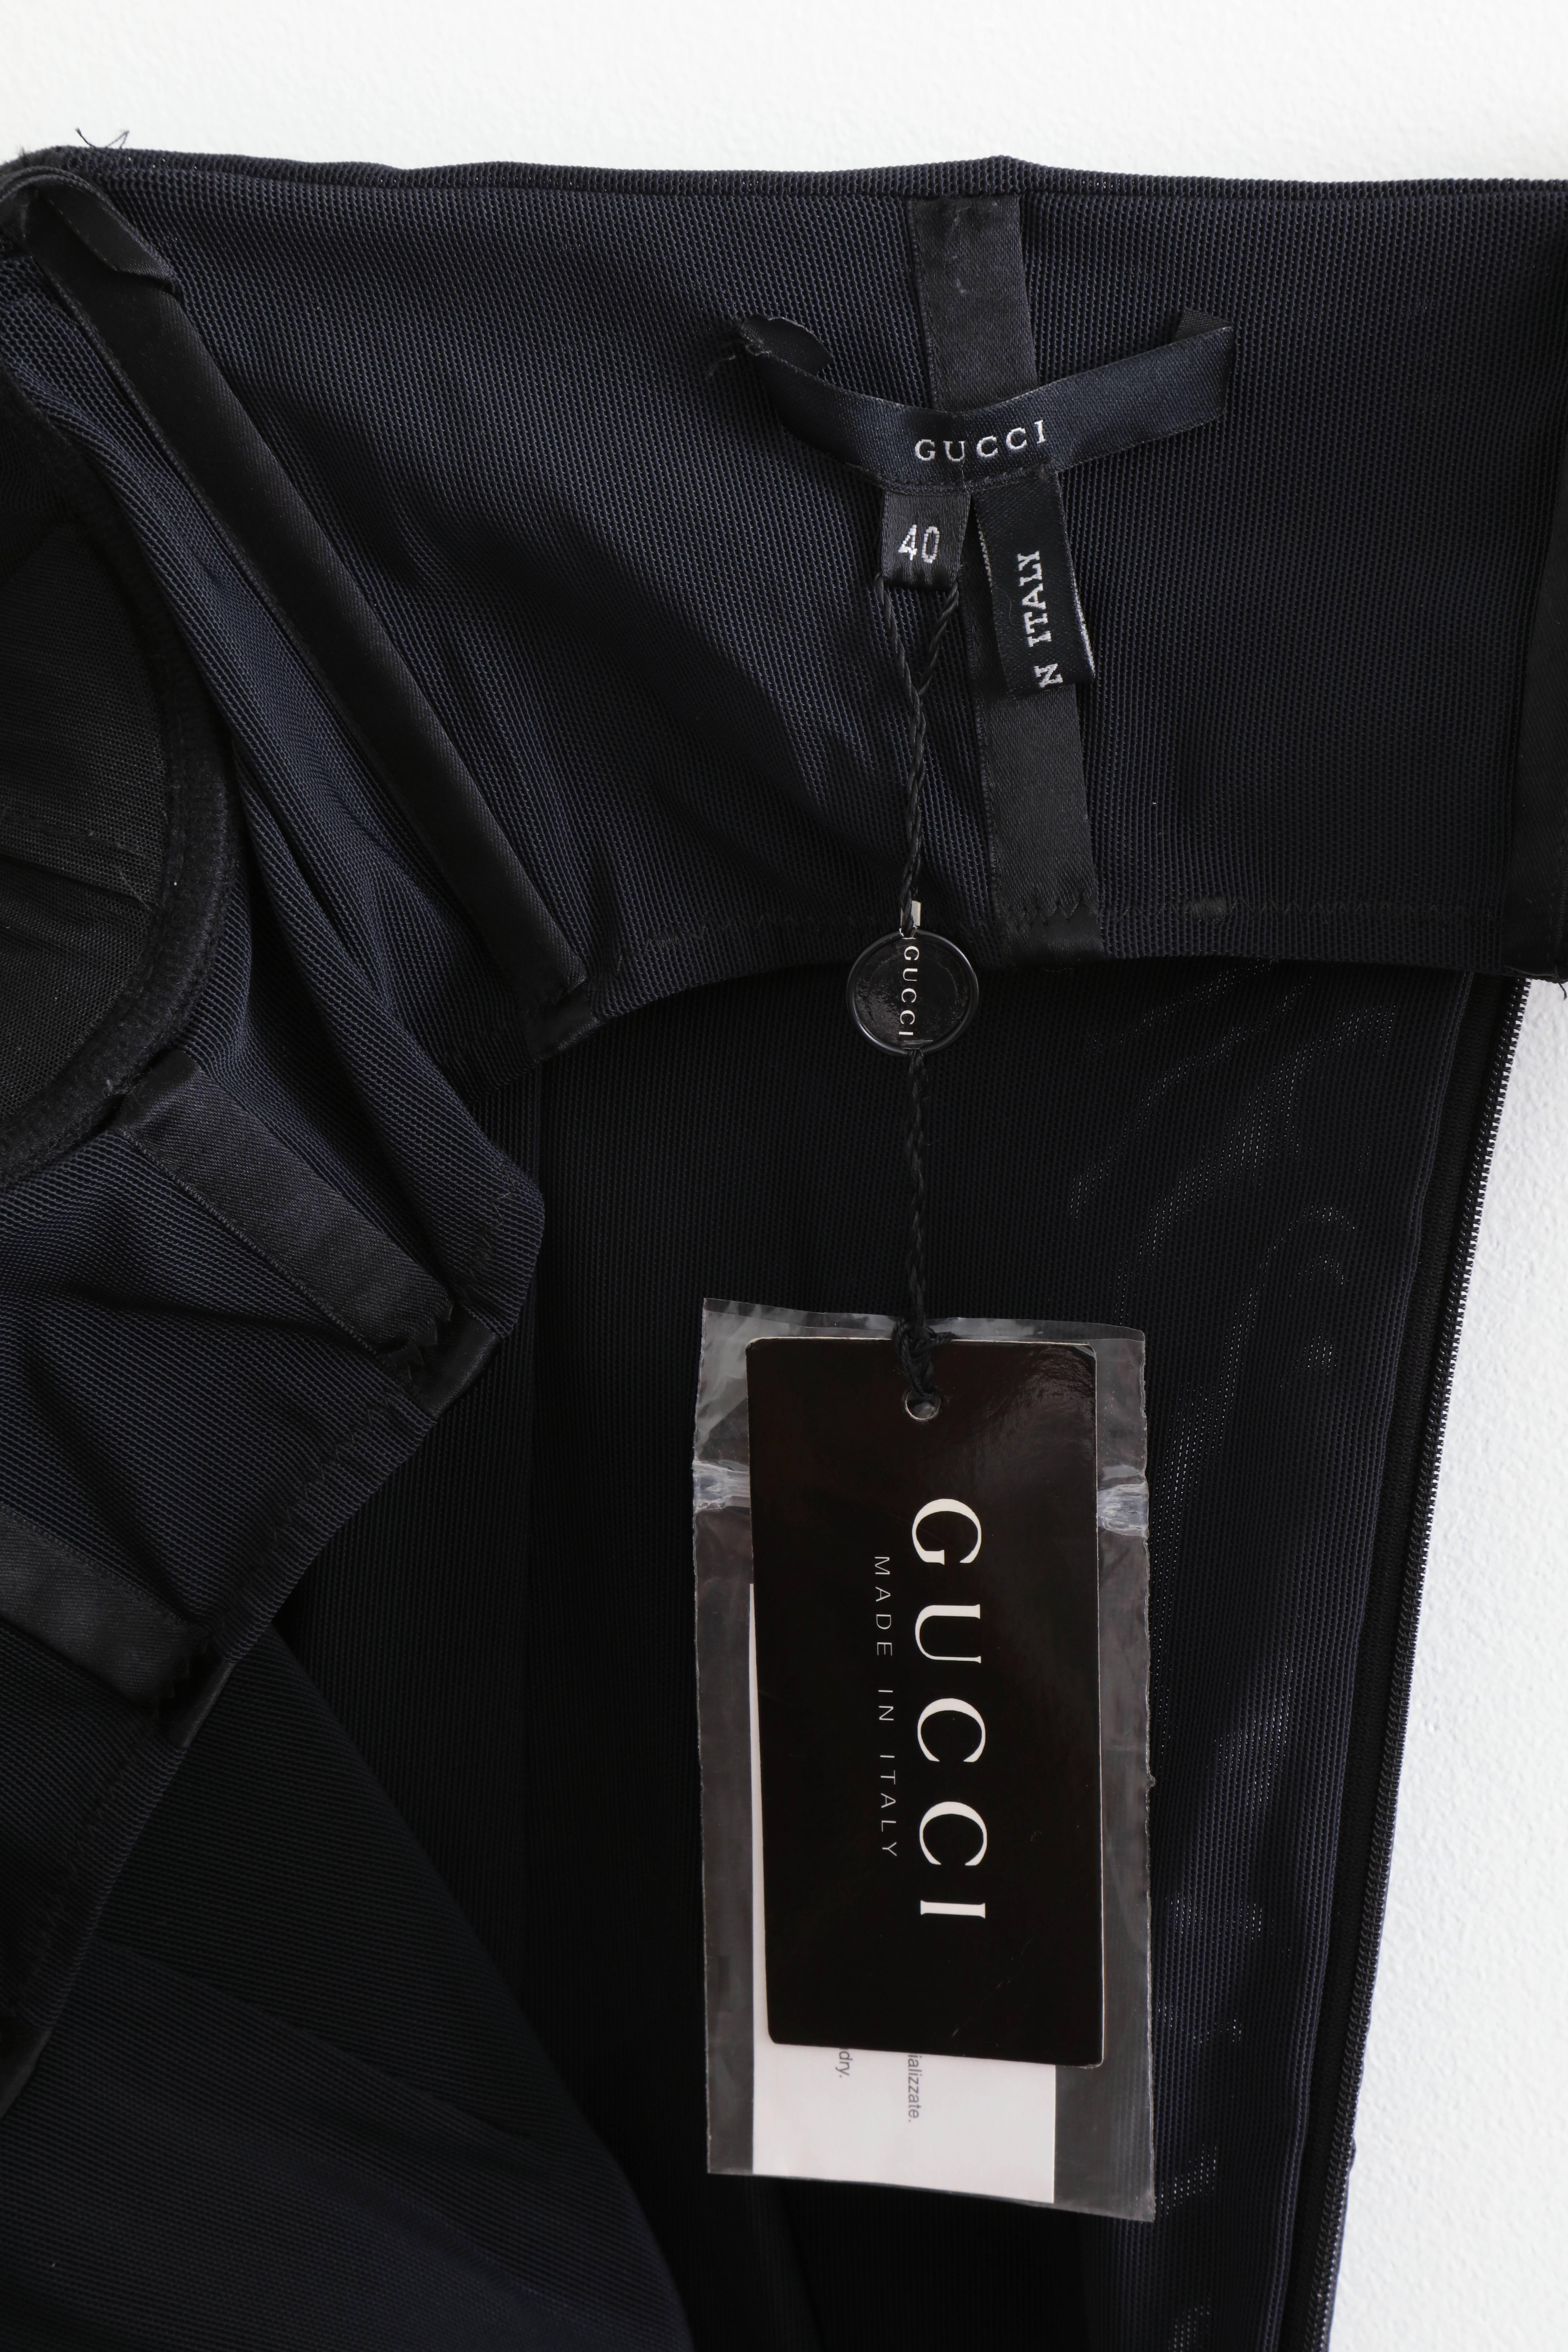 Gucci Black Tube Corset Dress with Leather Inserts For Sale 2